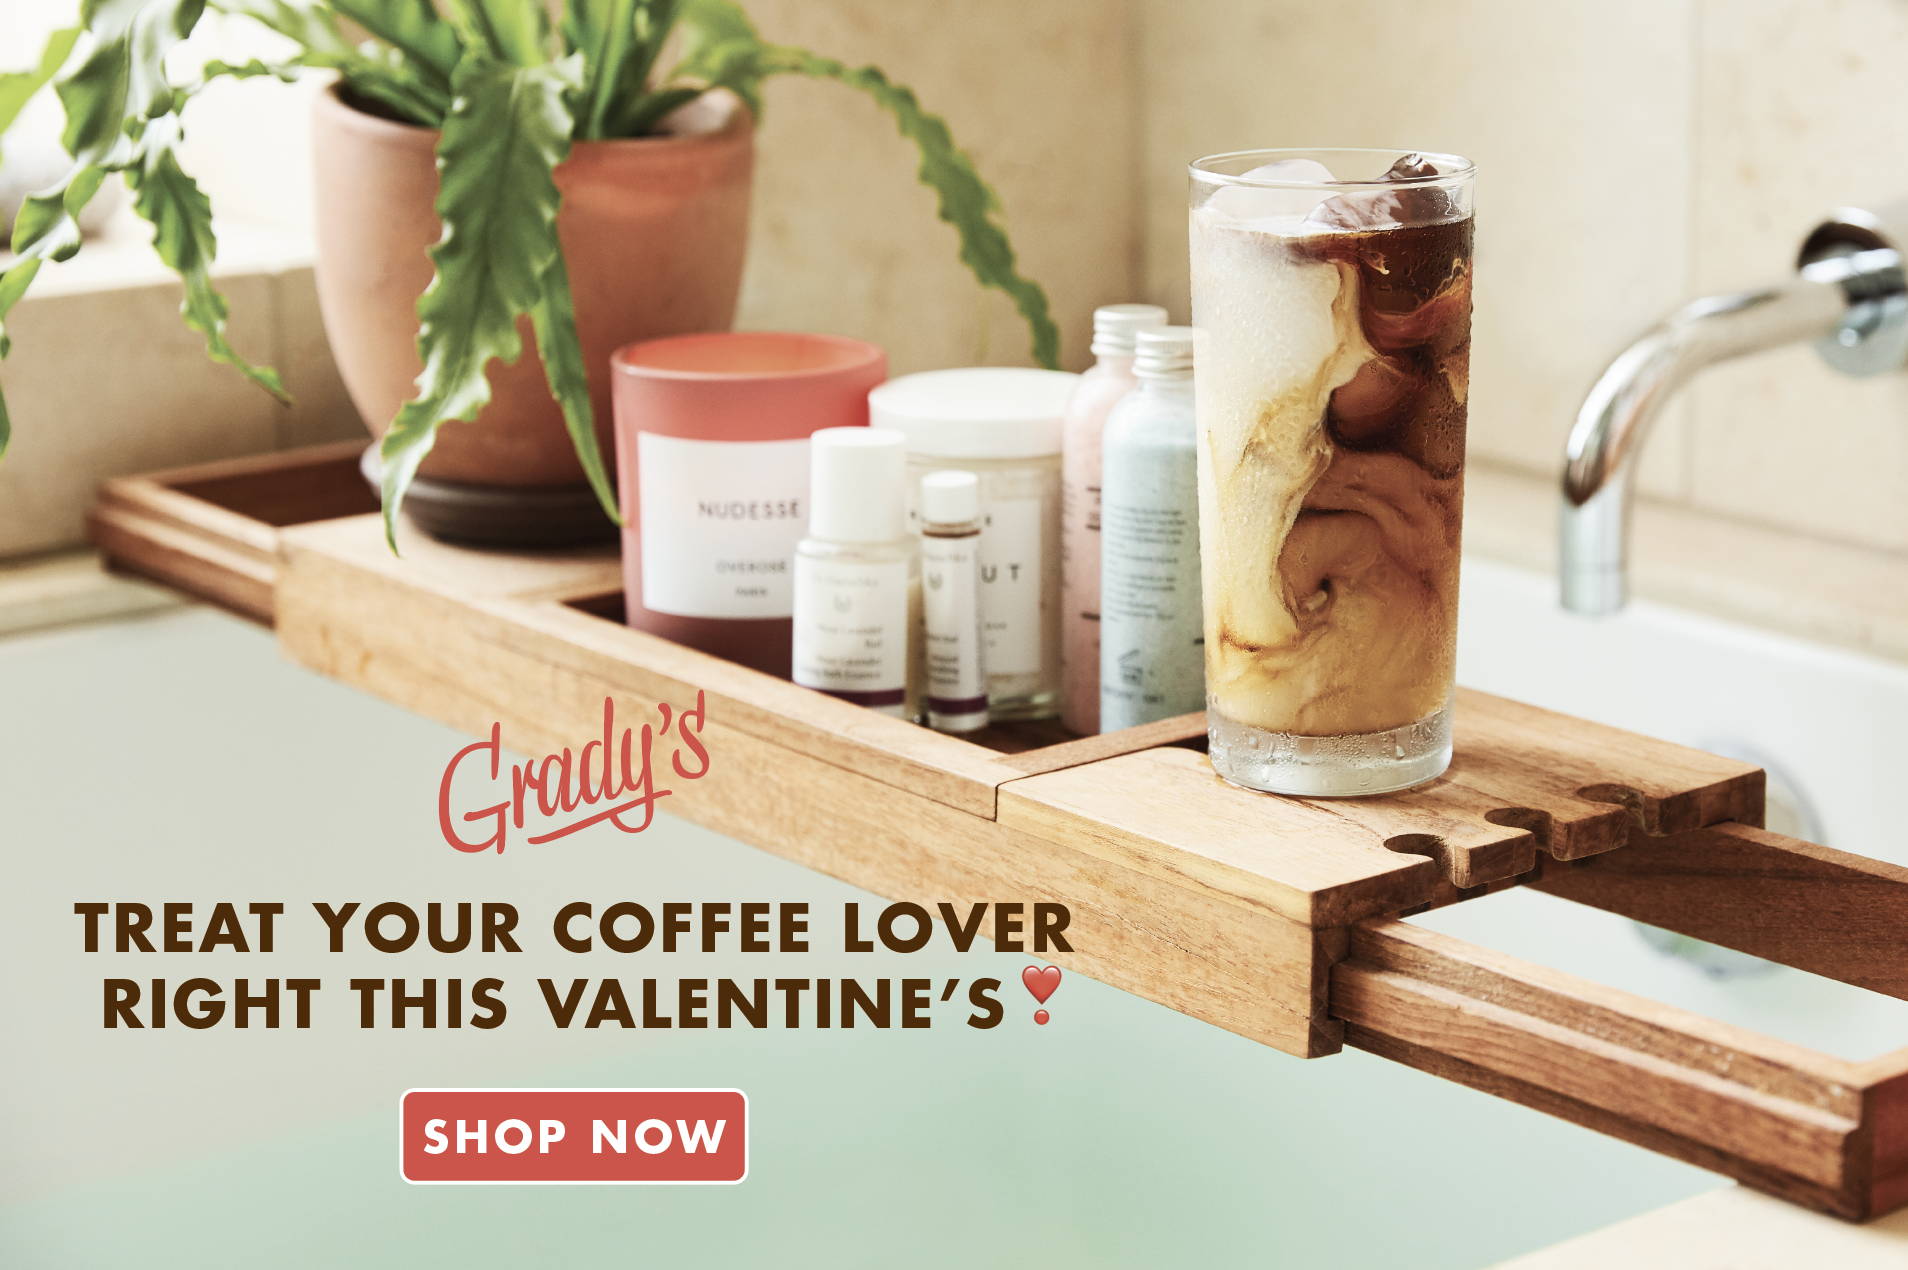 Treat your coffee lover right this Valentines's!